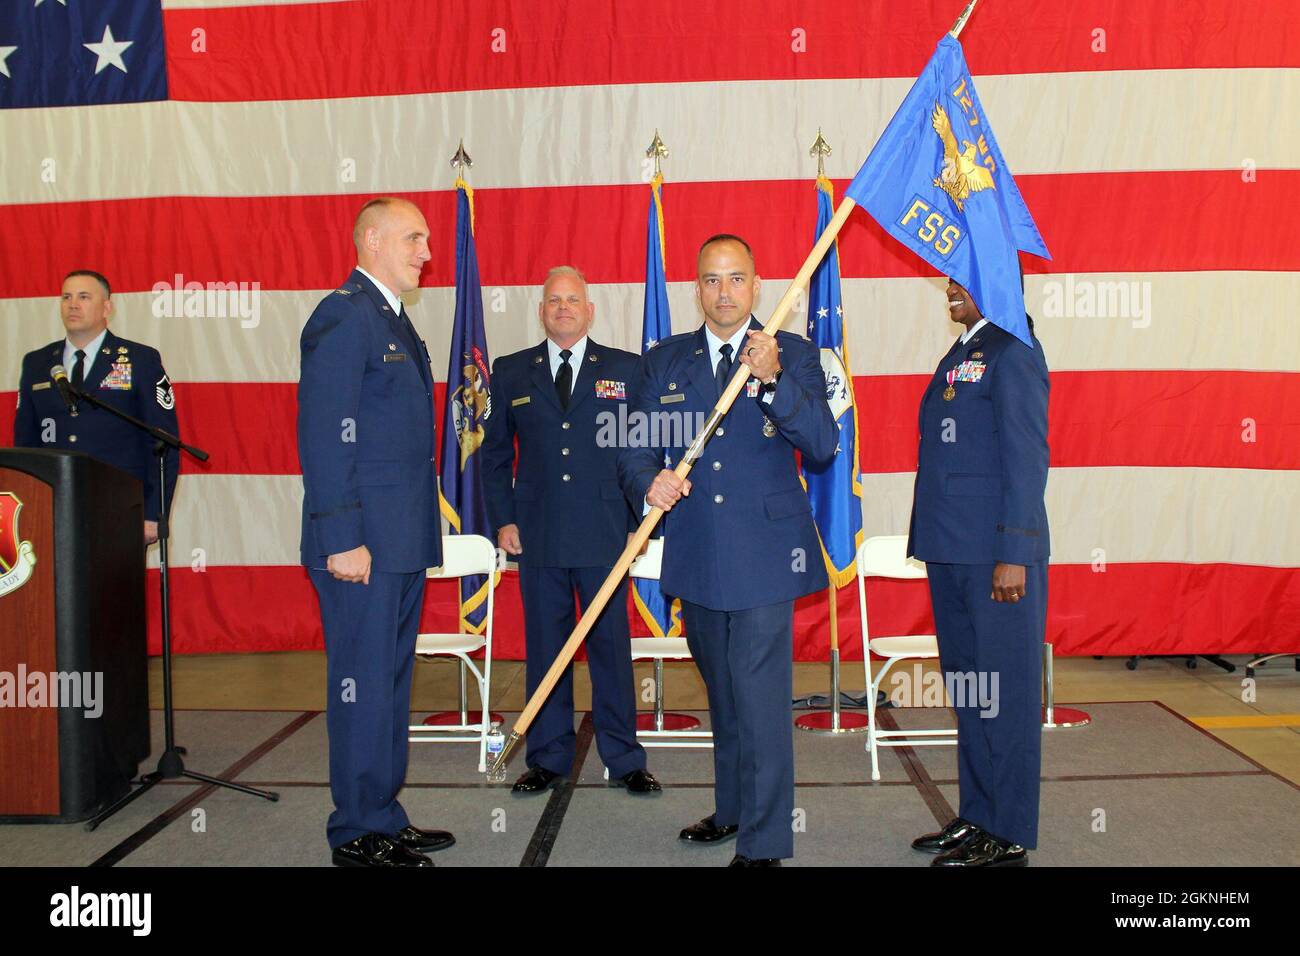 Lt. Col. Sam Trapasso holds the guidon of the 127th Force Support Squadron after taking command of the squadron in a formal ceremony at Selfridge Air National Guard Base, Mich., June 6, 2021. Trapasso accepted the guidon from 127th Mission Support Group commander Lt. Col. Daniel Kramer. Major Camille Horne is the outgoing commander and is moving to a positon at the Air National Guard Readiness Center. Stock Photo